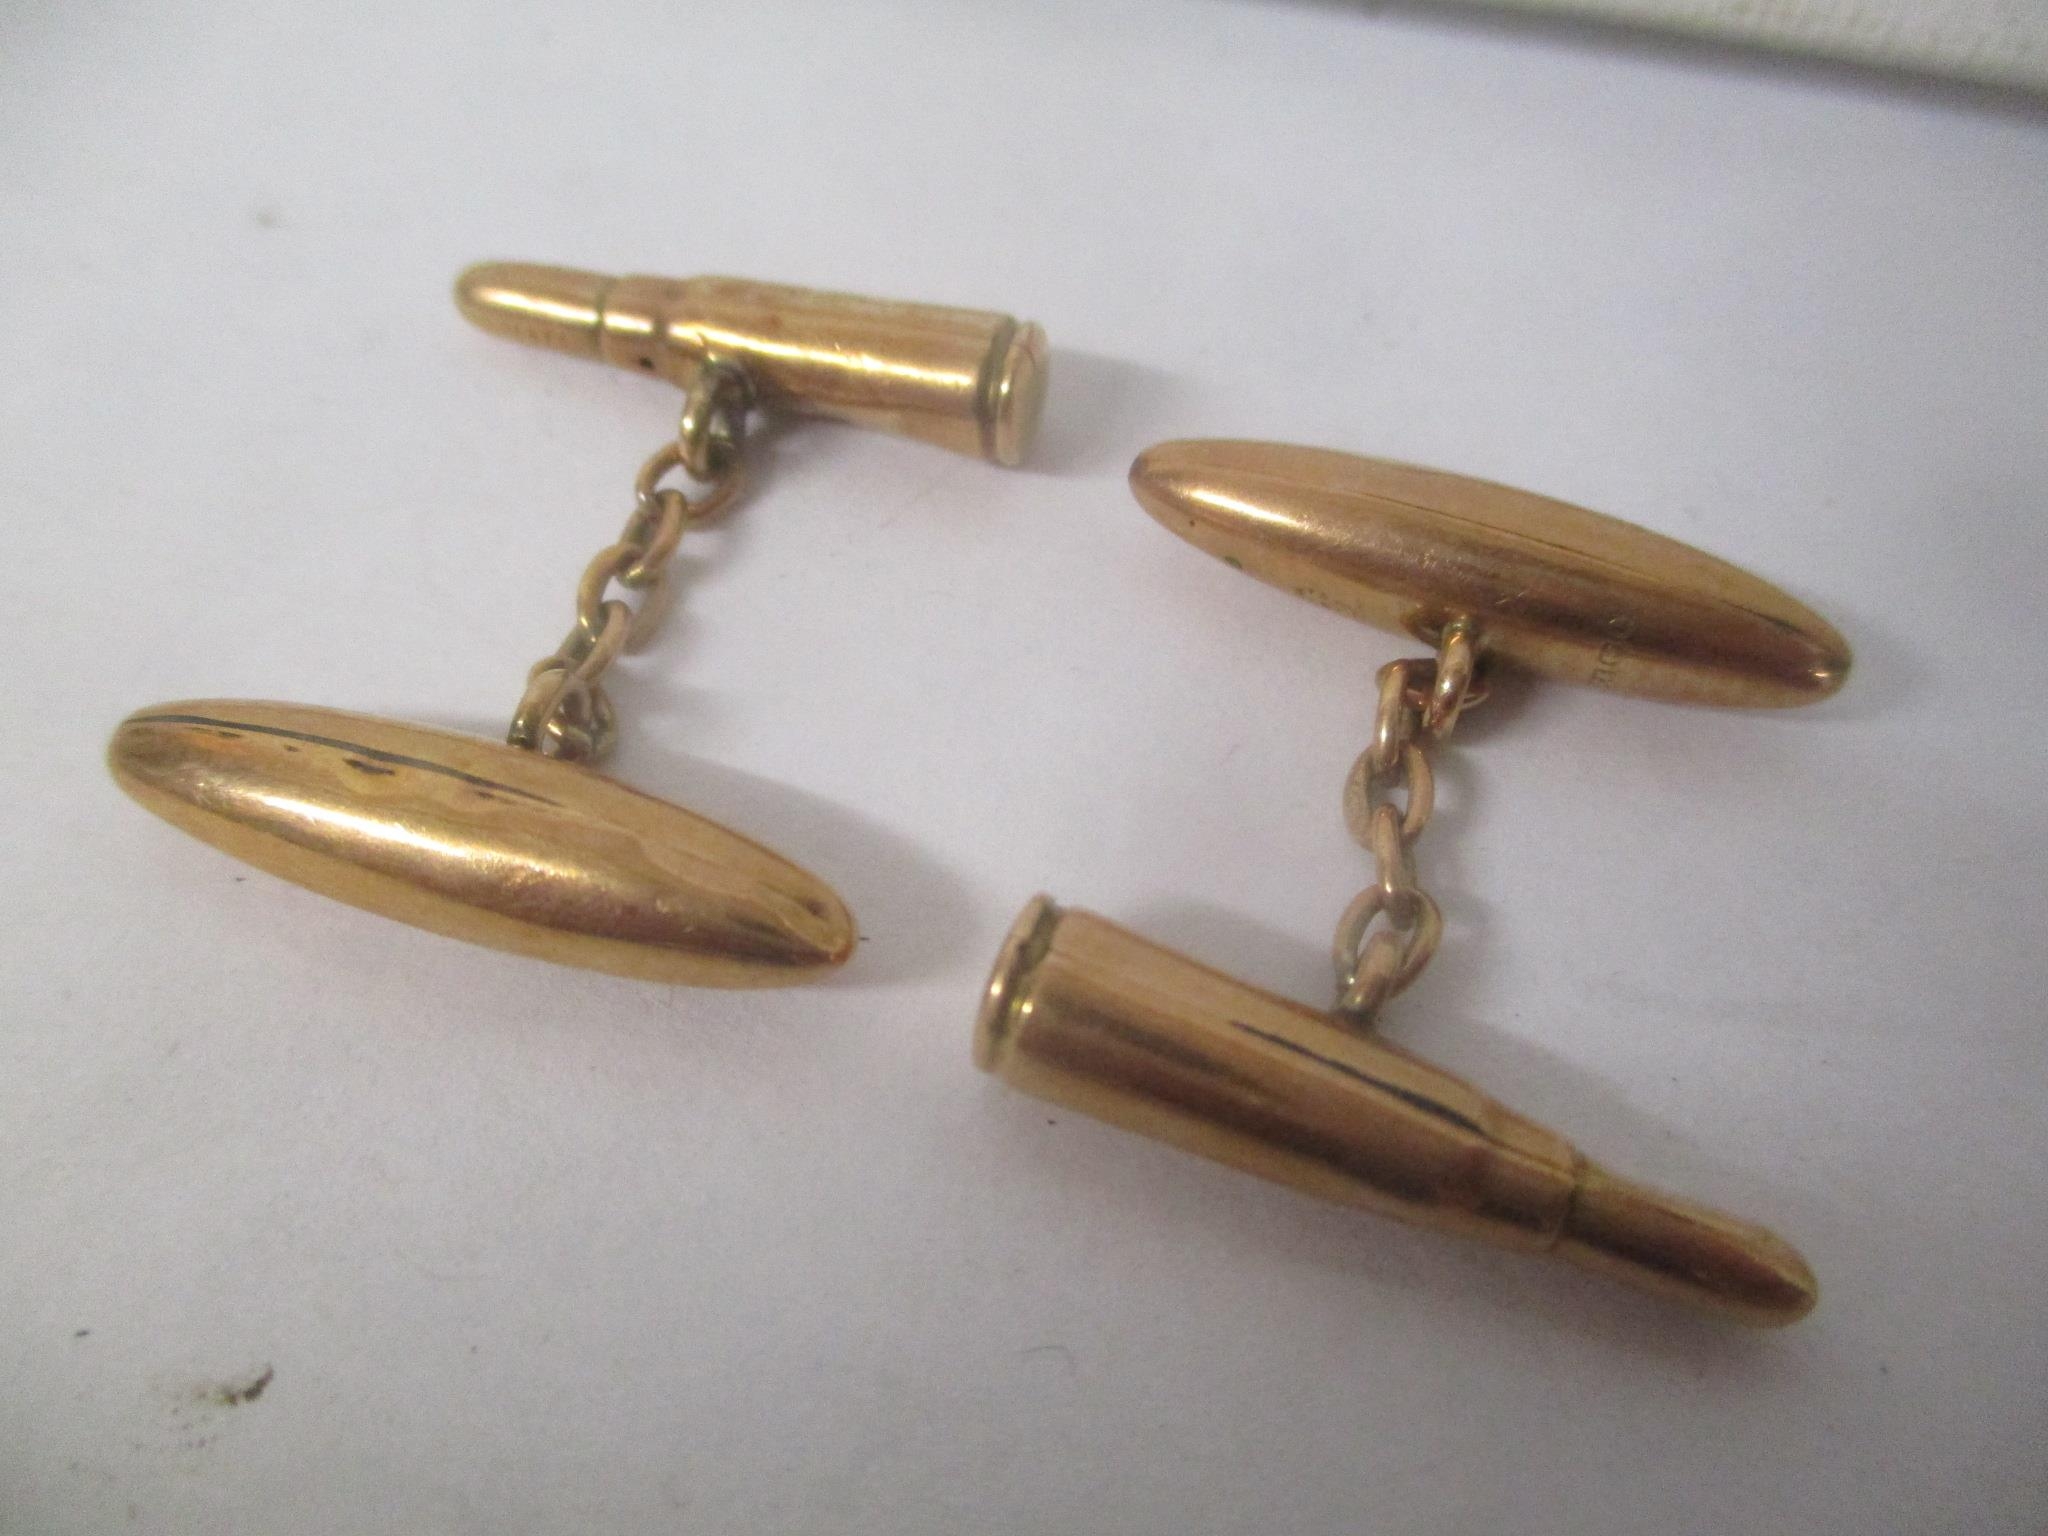 A pair of 9ct gold cufflinks fashioned as bullets 3.4g